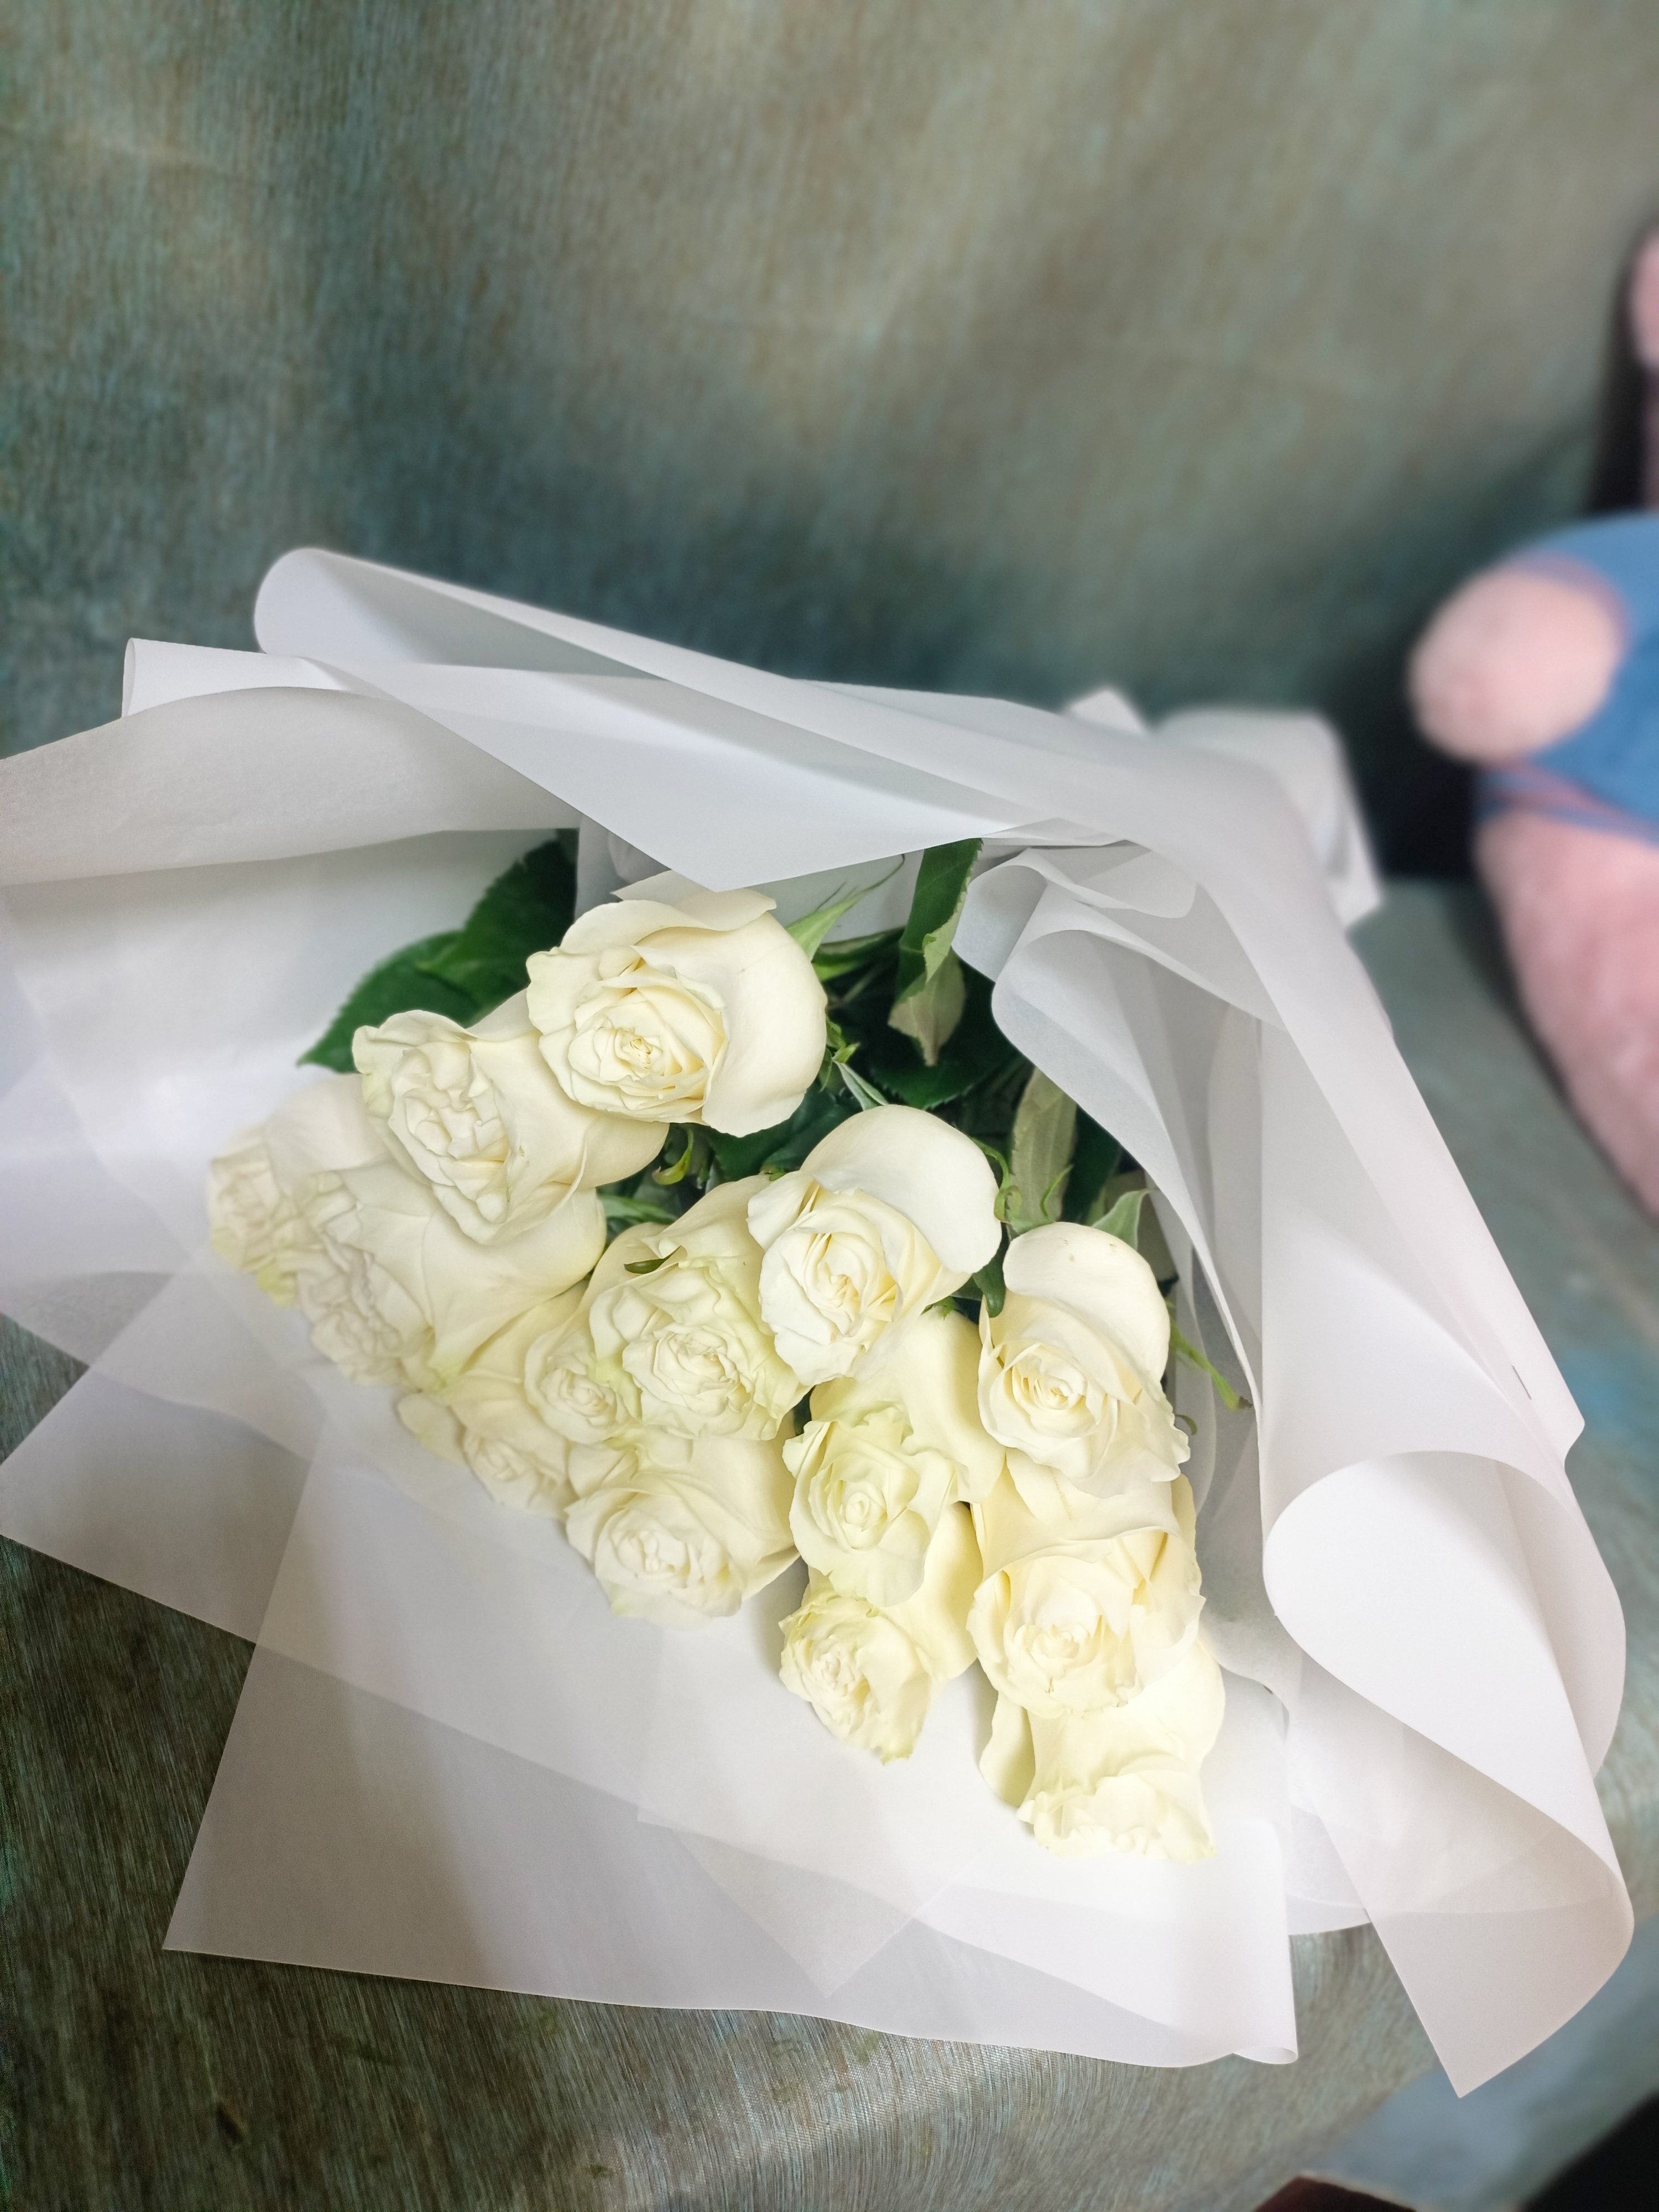 Bouquet of 15 delicate white roses of premium mondial variety flowers delivered to Kostanay.